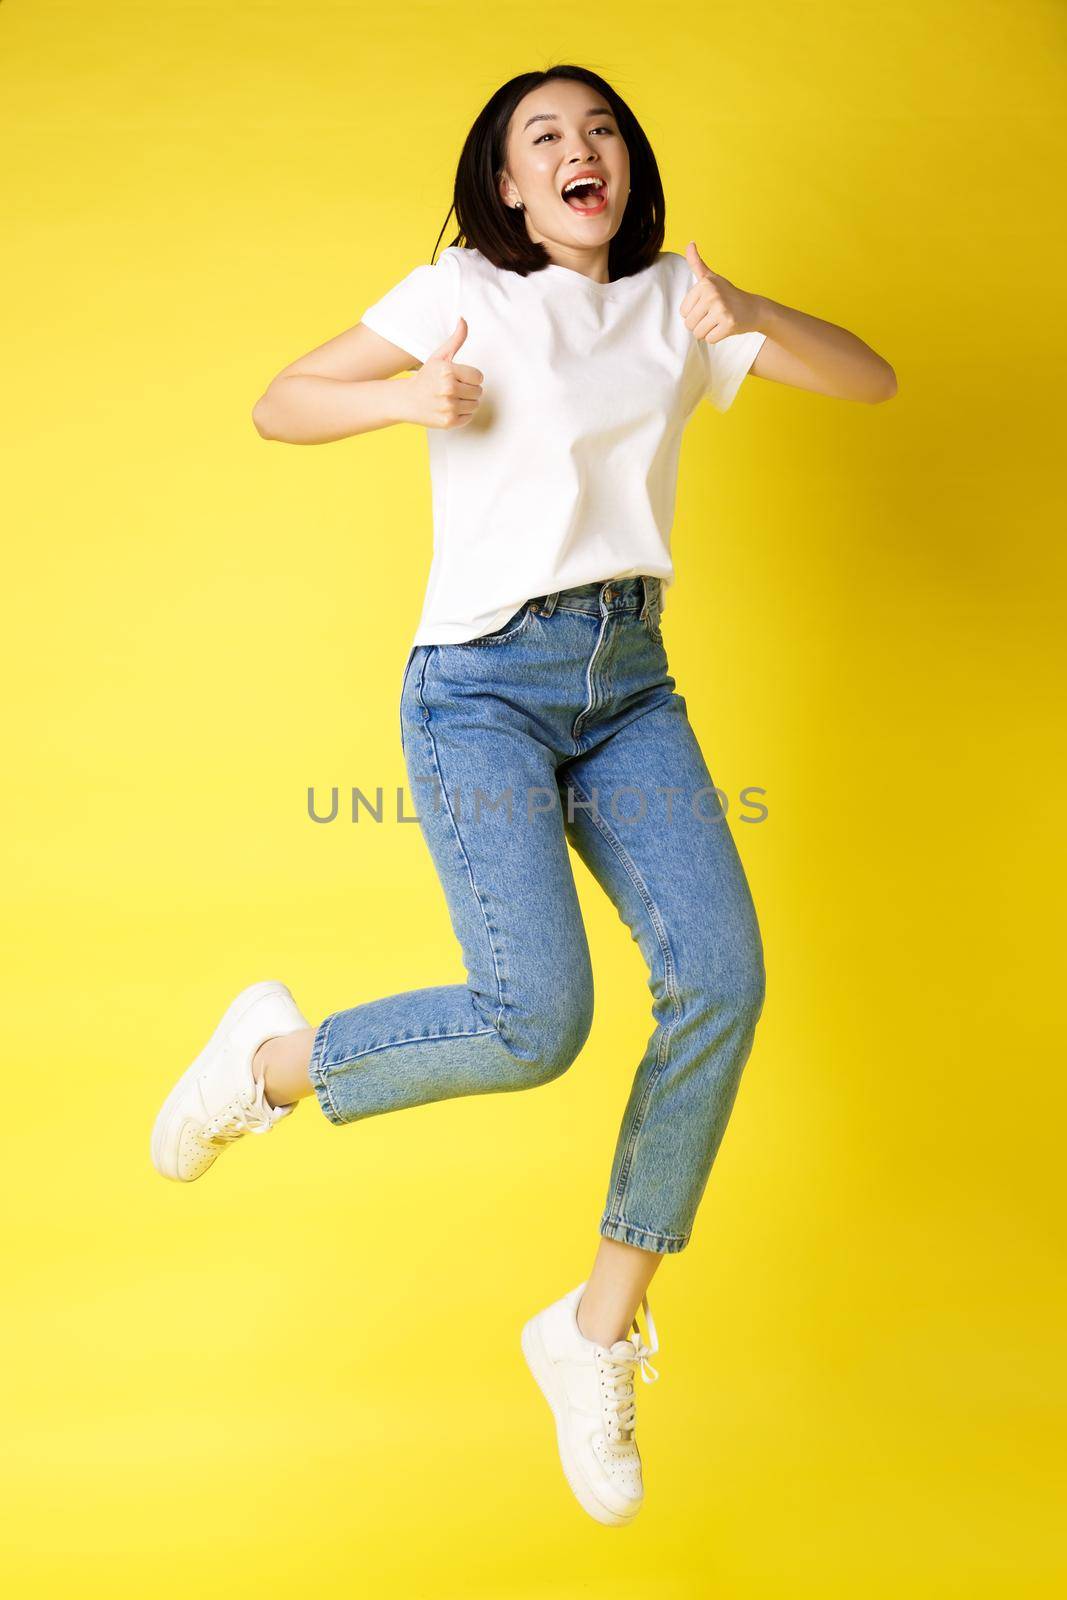 Full size of happy young asian woman jumping from joy, showing thumbs up in approval, posing over yellow background in jeans and casual white t-shirt by Benzoix